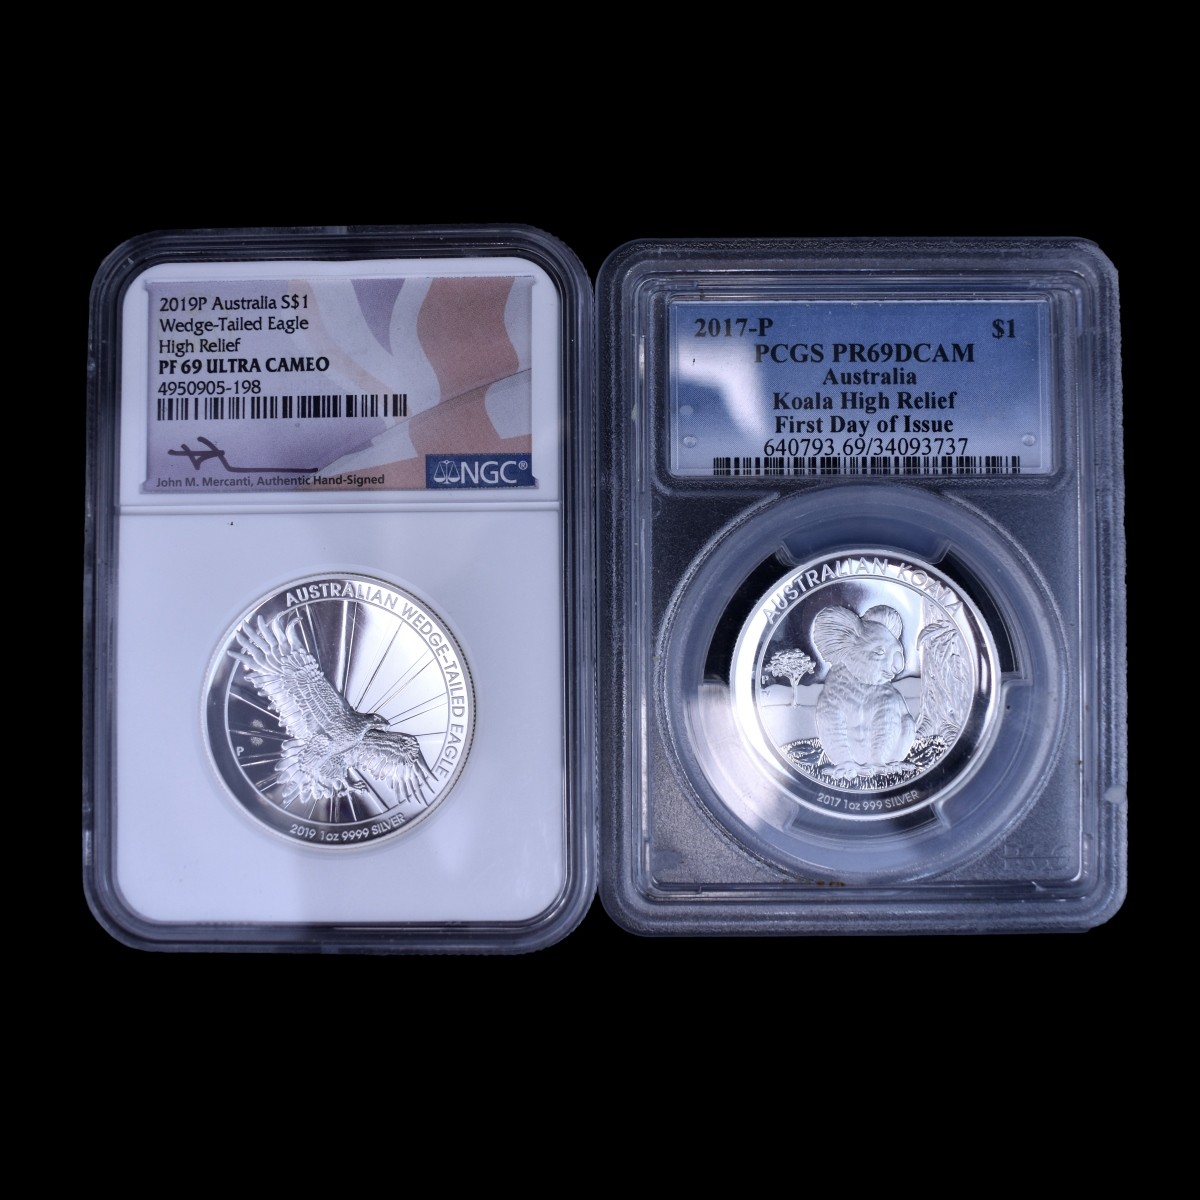 Two 1 Oz. Silver Slabbed Coins